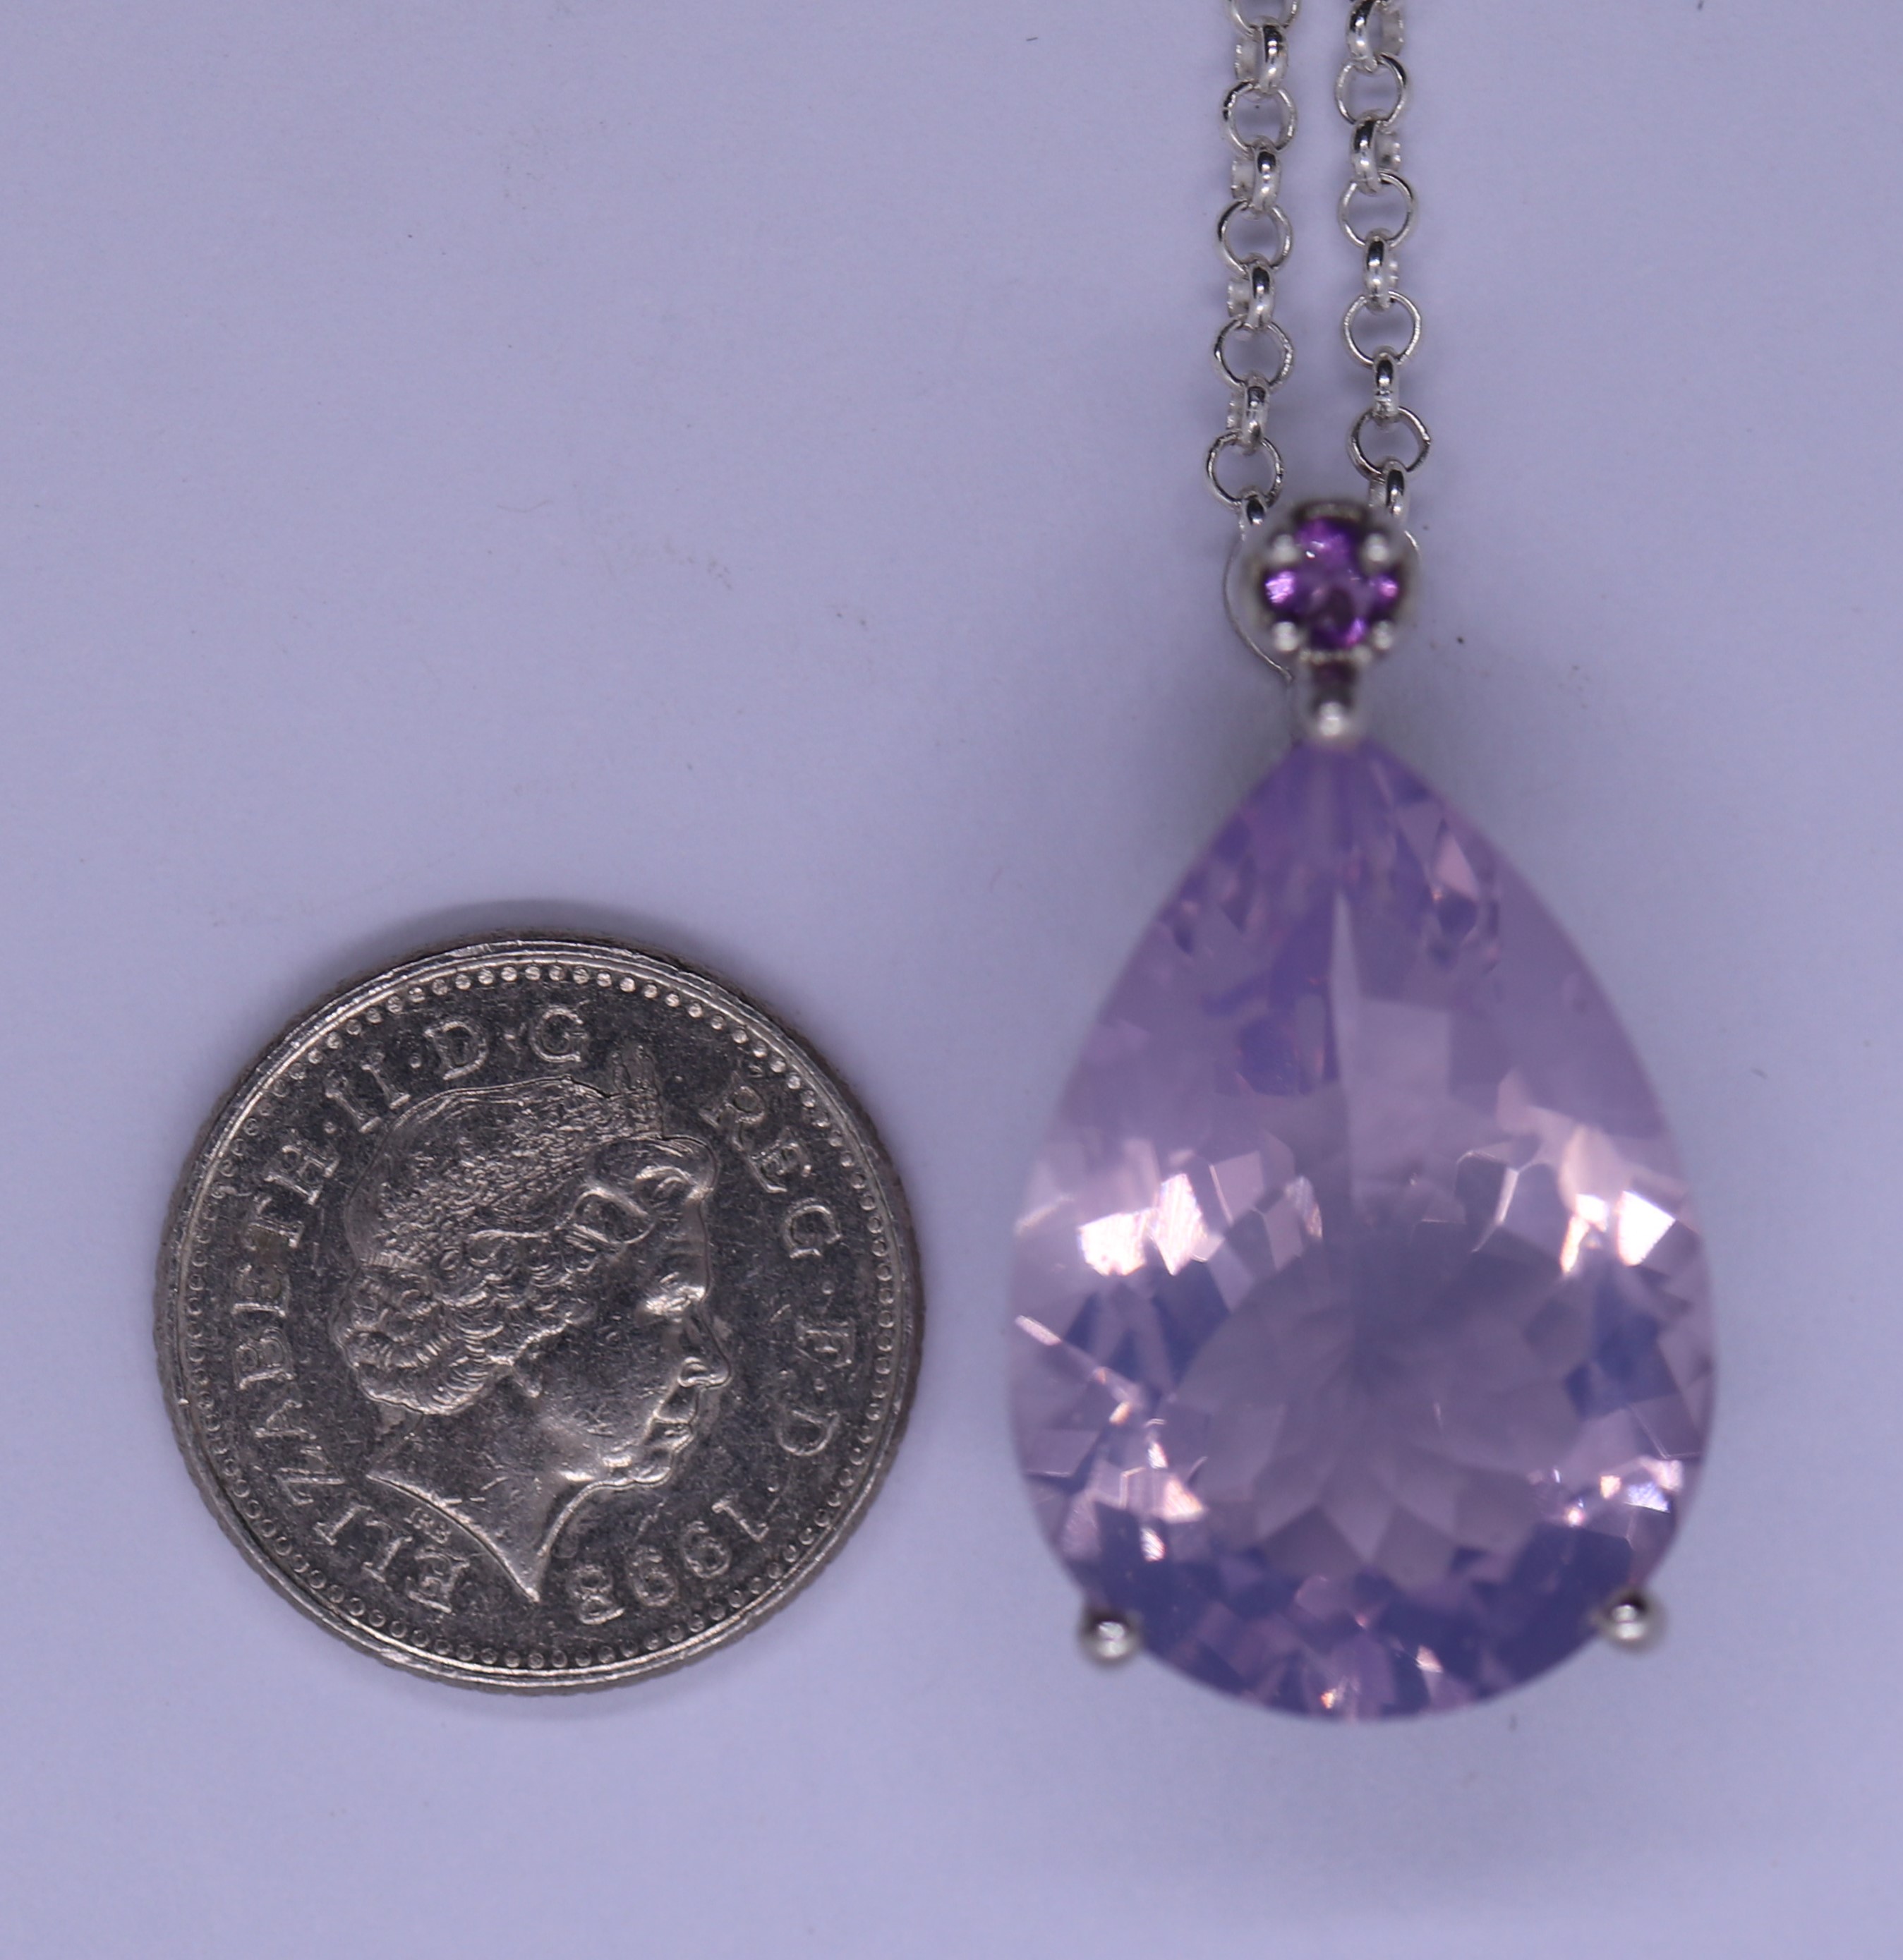 Silver amethyst set pendent on chain - Image 2 of 3